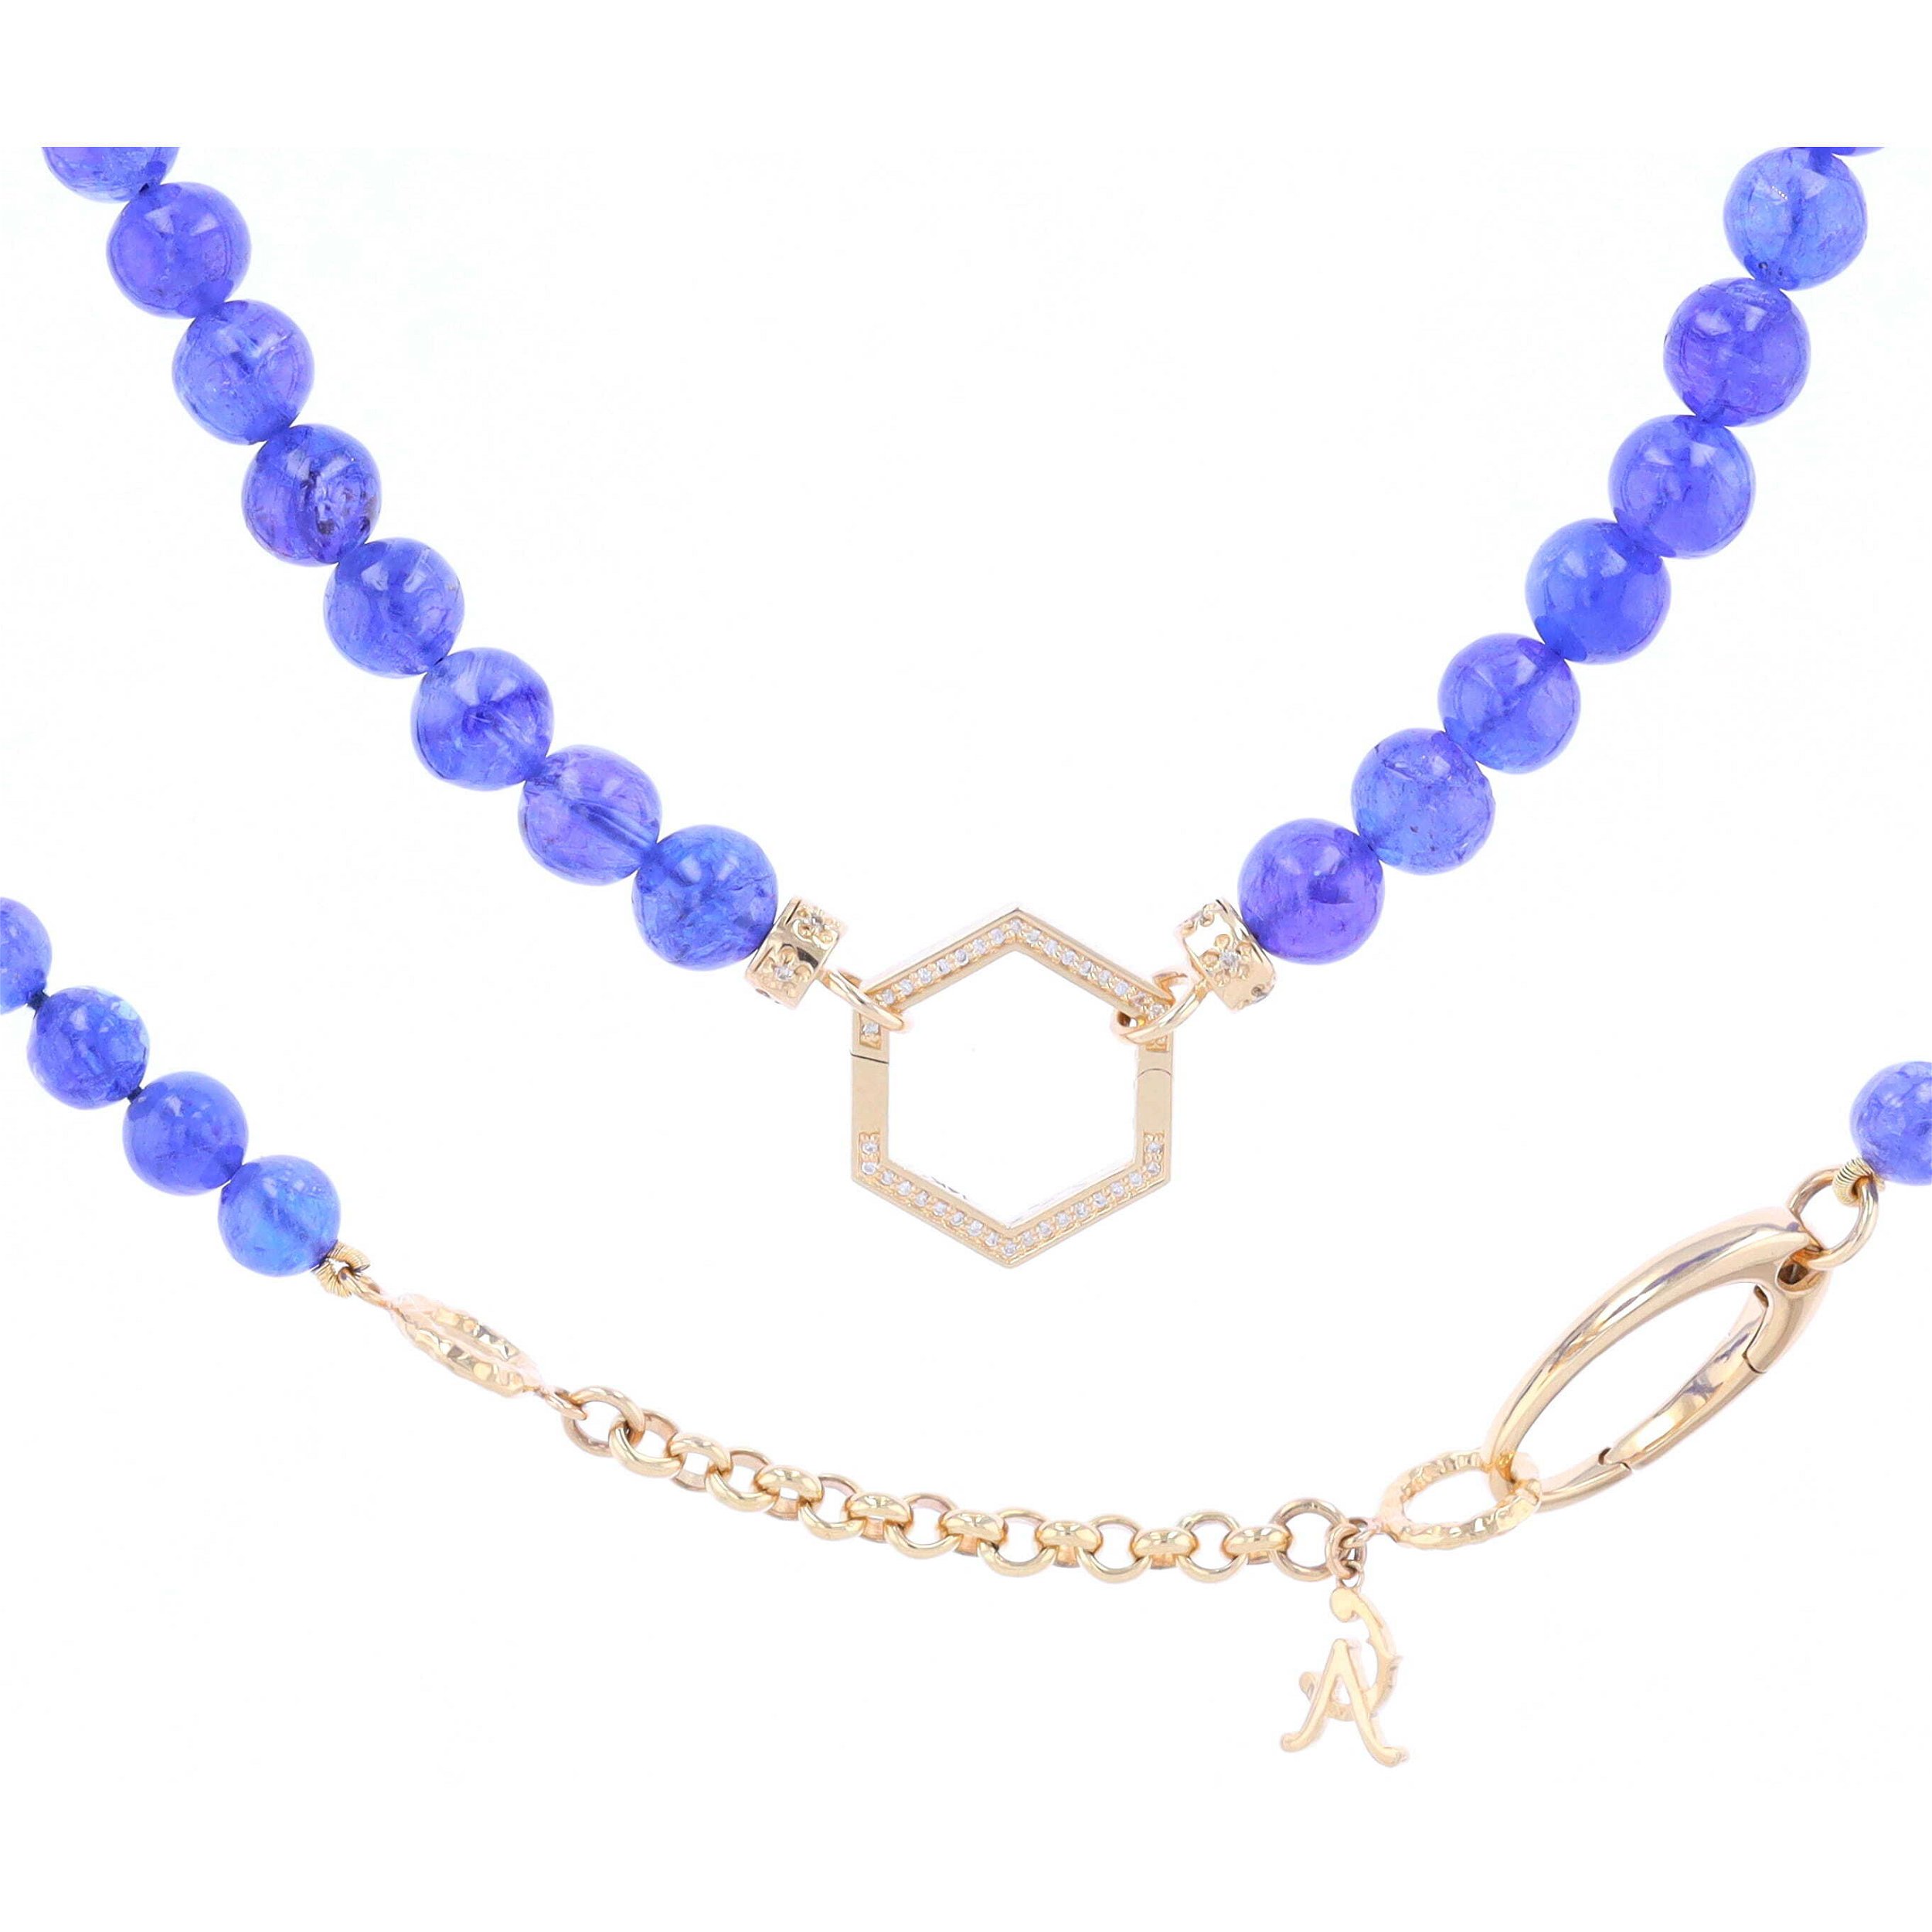 18.5"-20.5" 6.8mm Hand Polished Translucent Tanzanite Beaded Chain With 14k Gold Extension And Gold Caps sold with: {Open-able Bale Type}